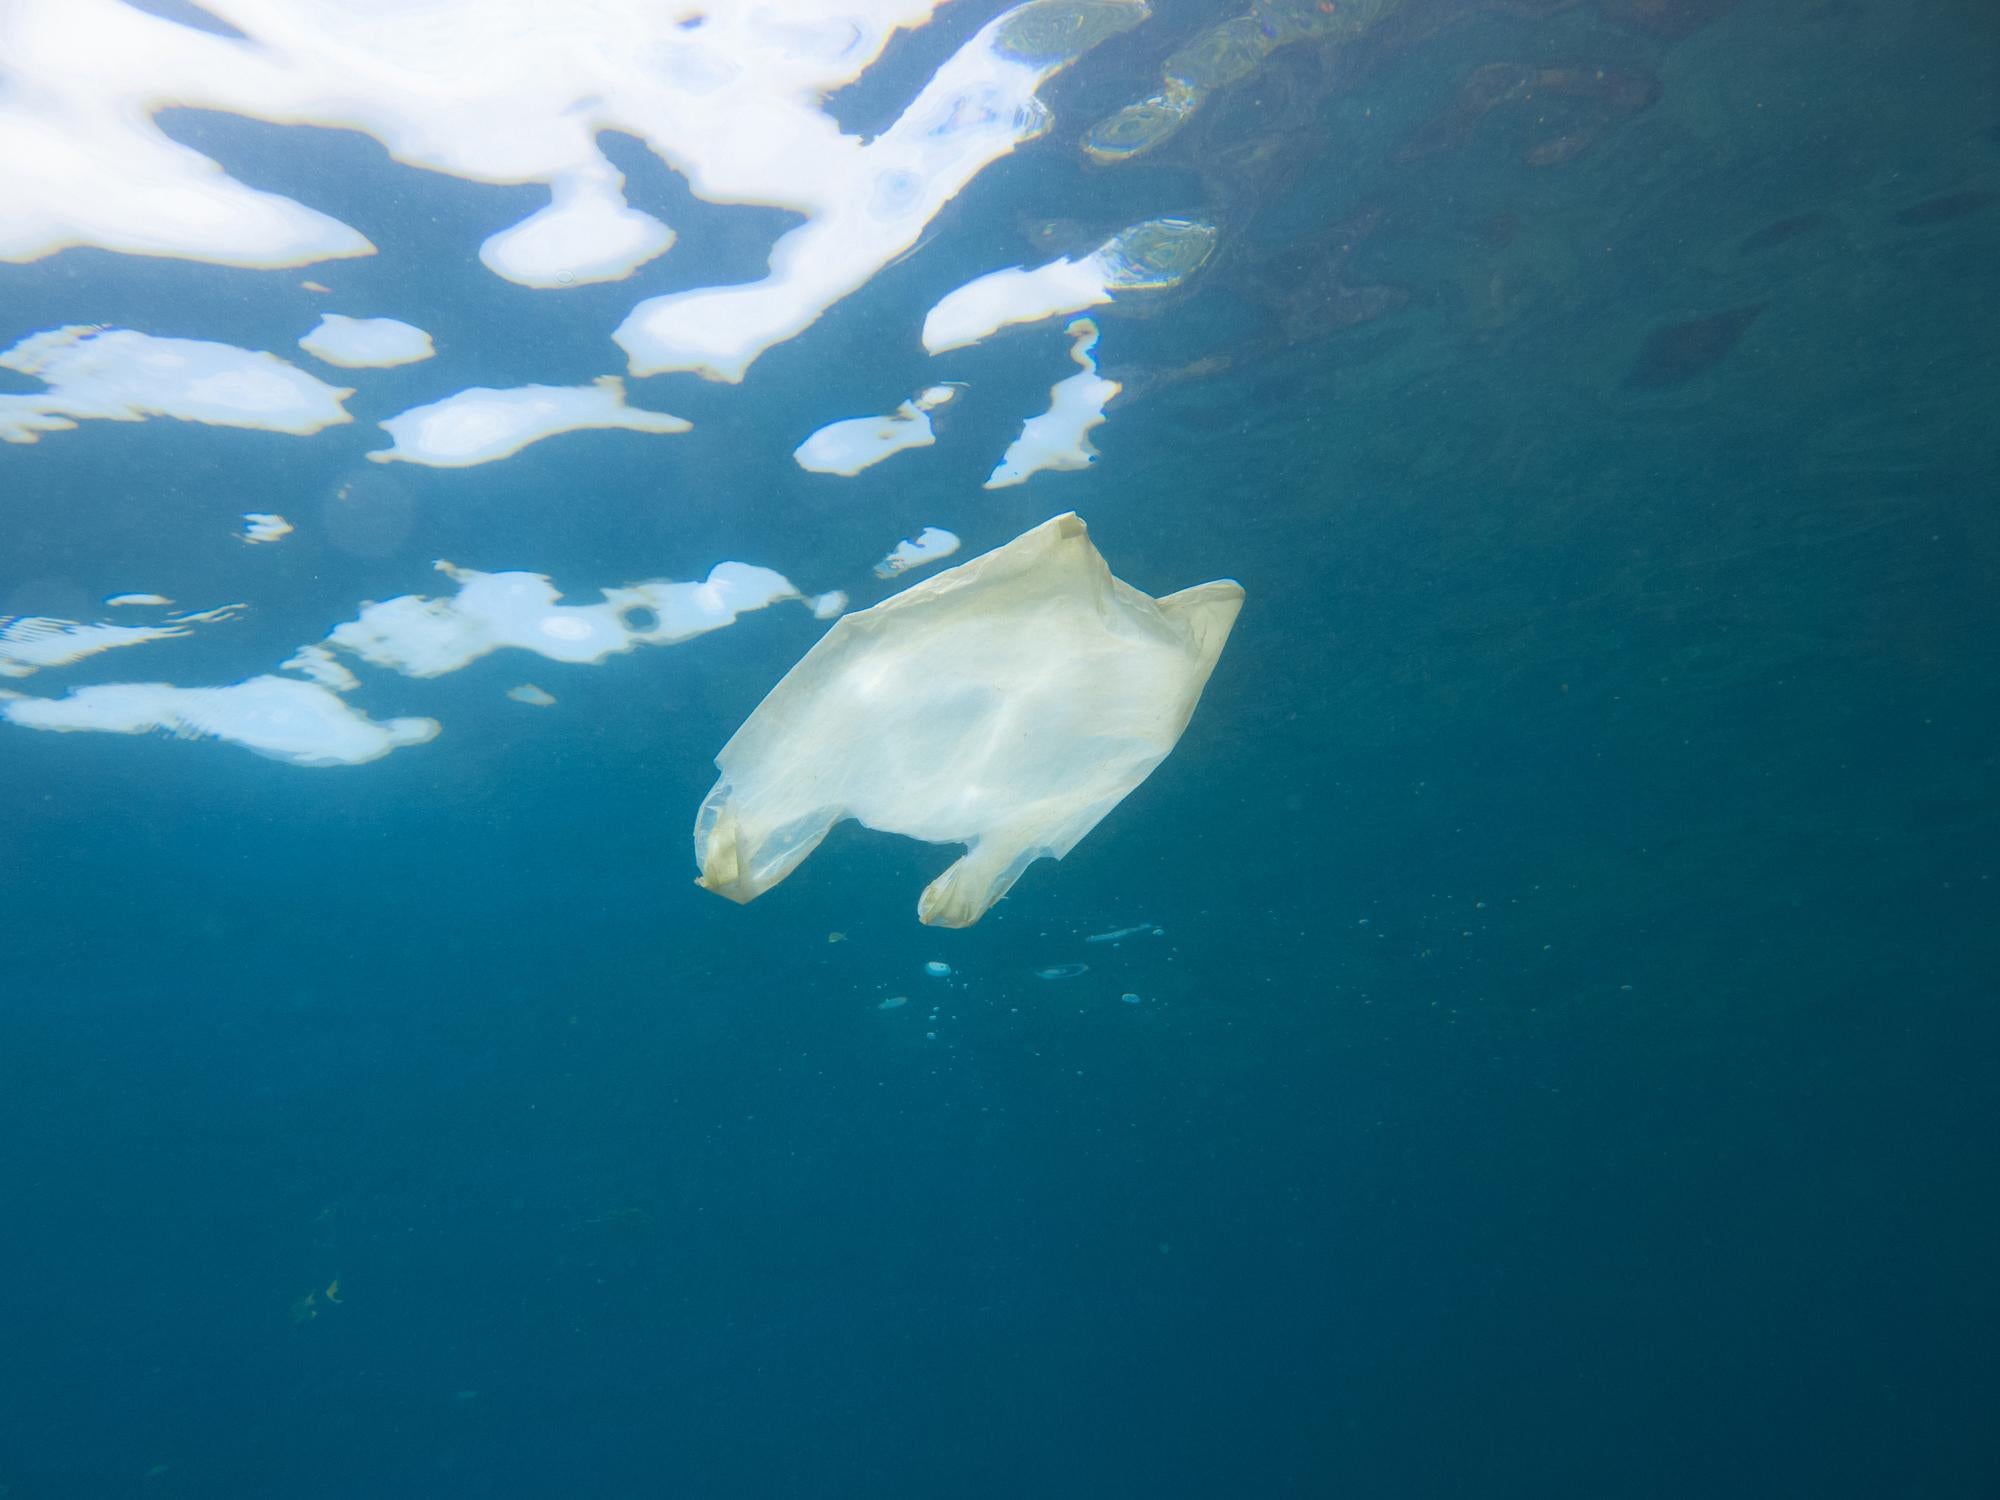 A discarded plastic bag floats at the surface of the sea